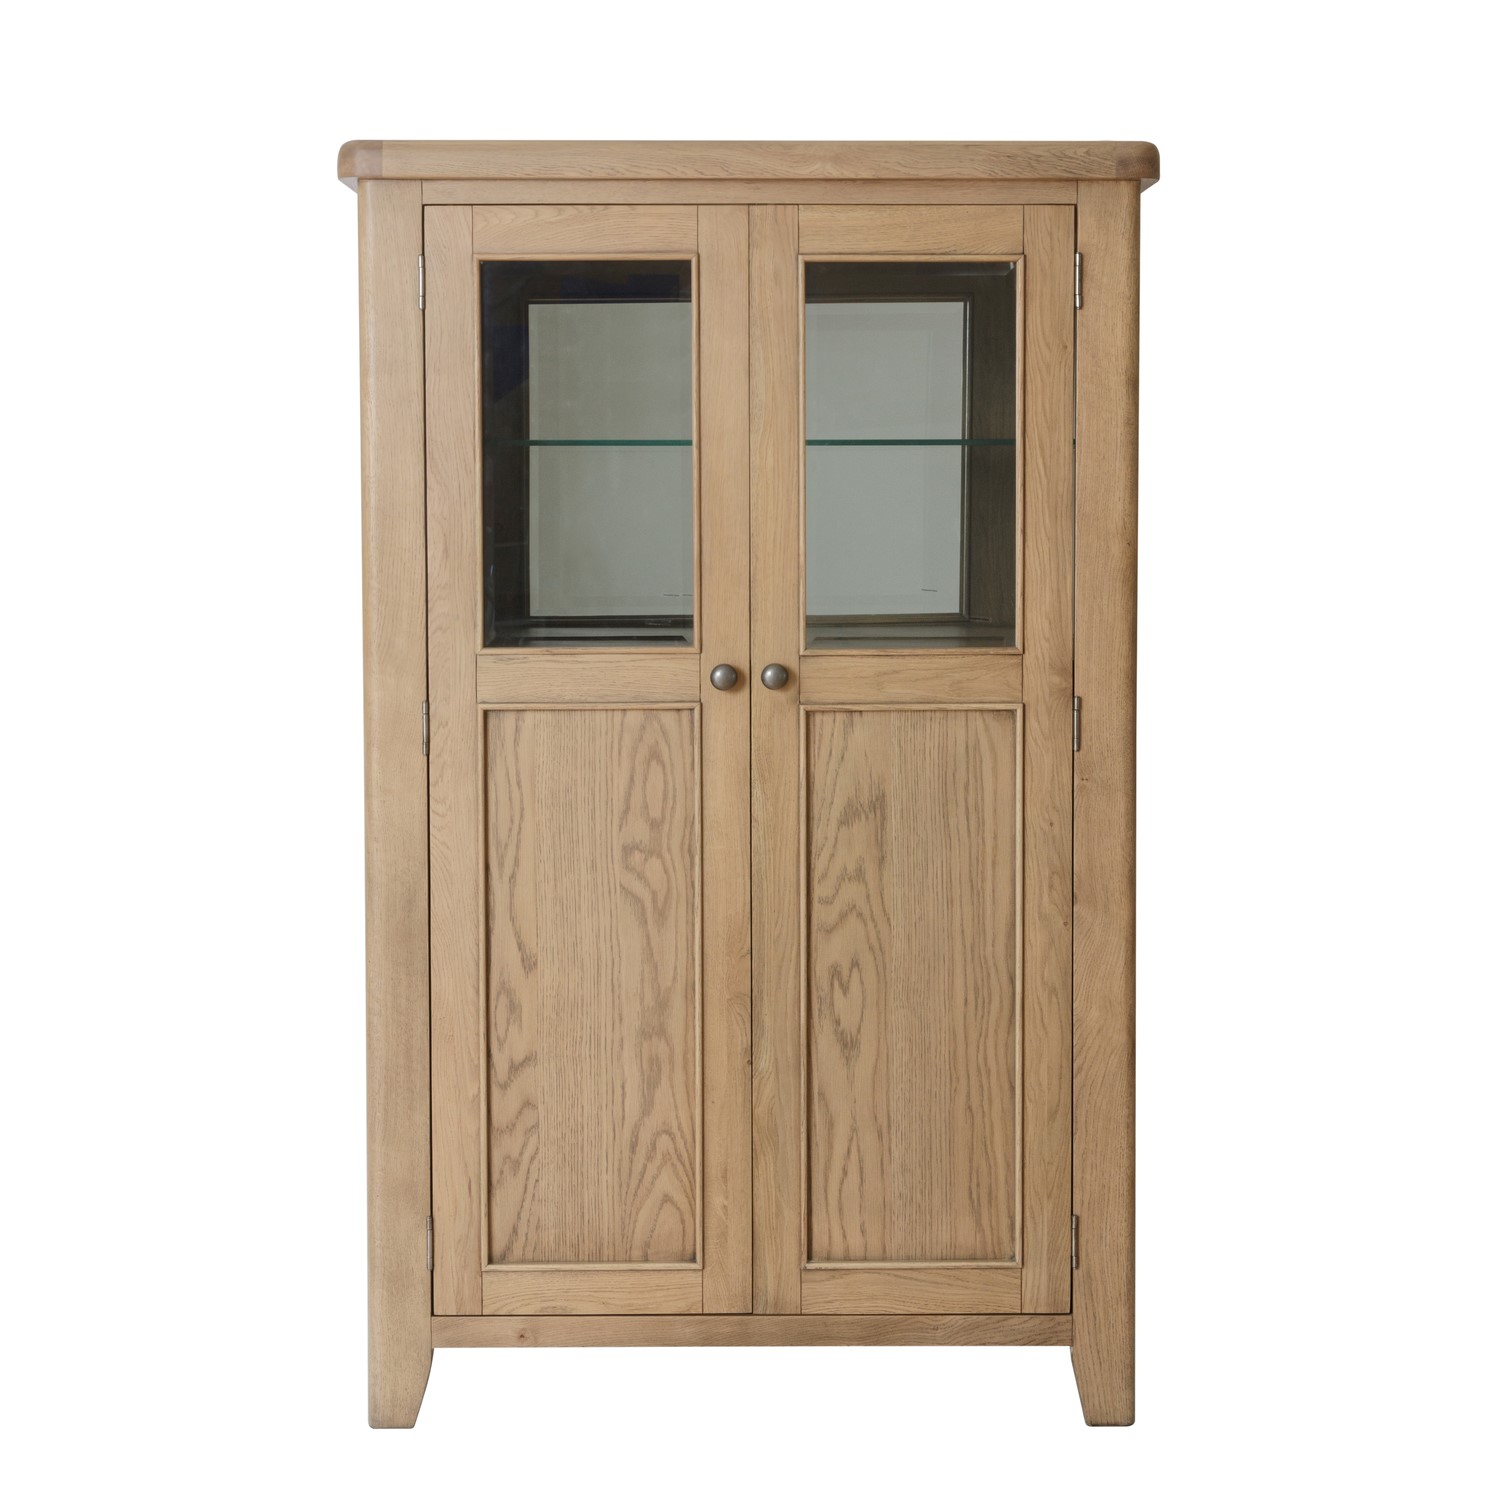 Read more about Smoked oak drinks cabinet